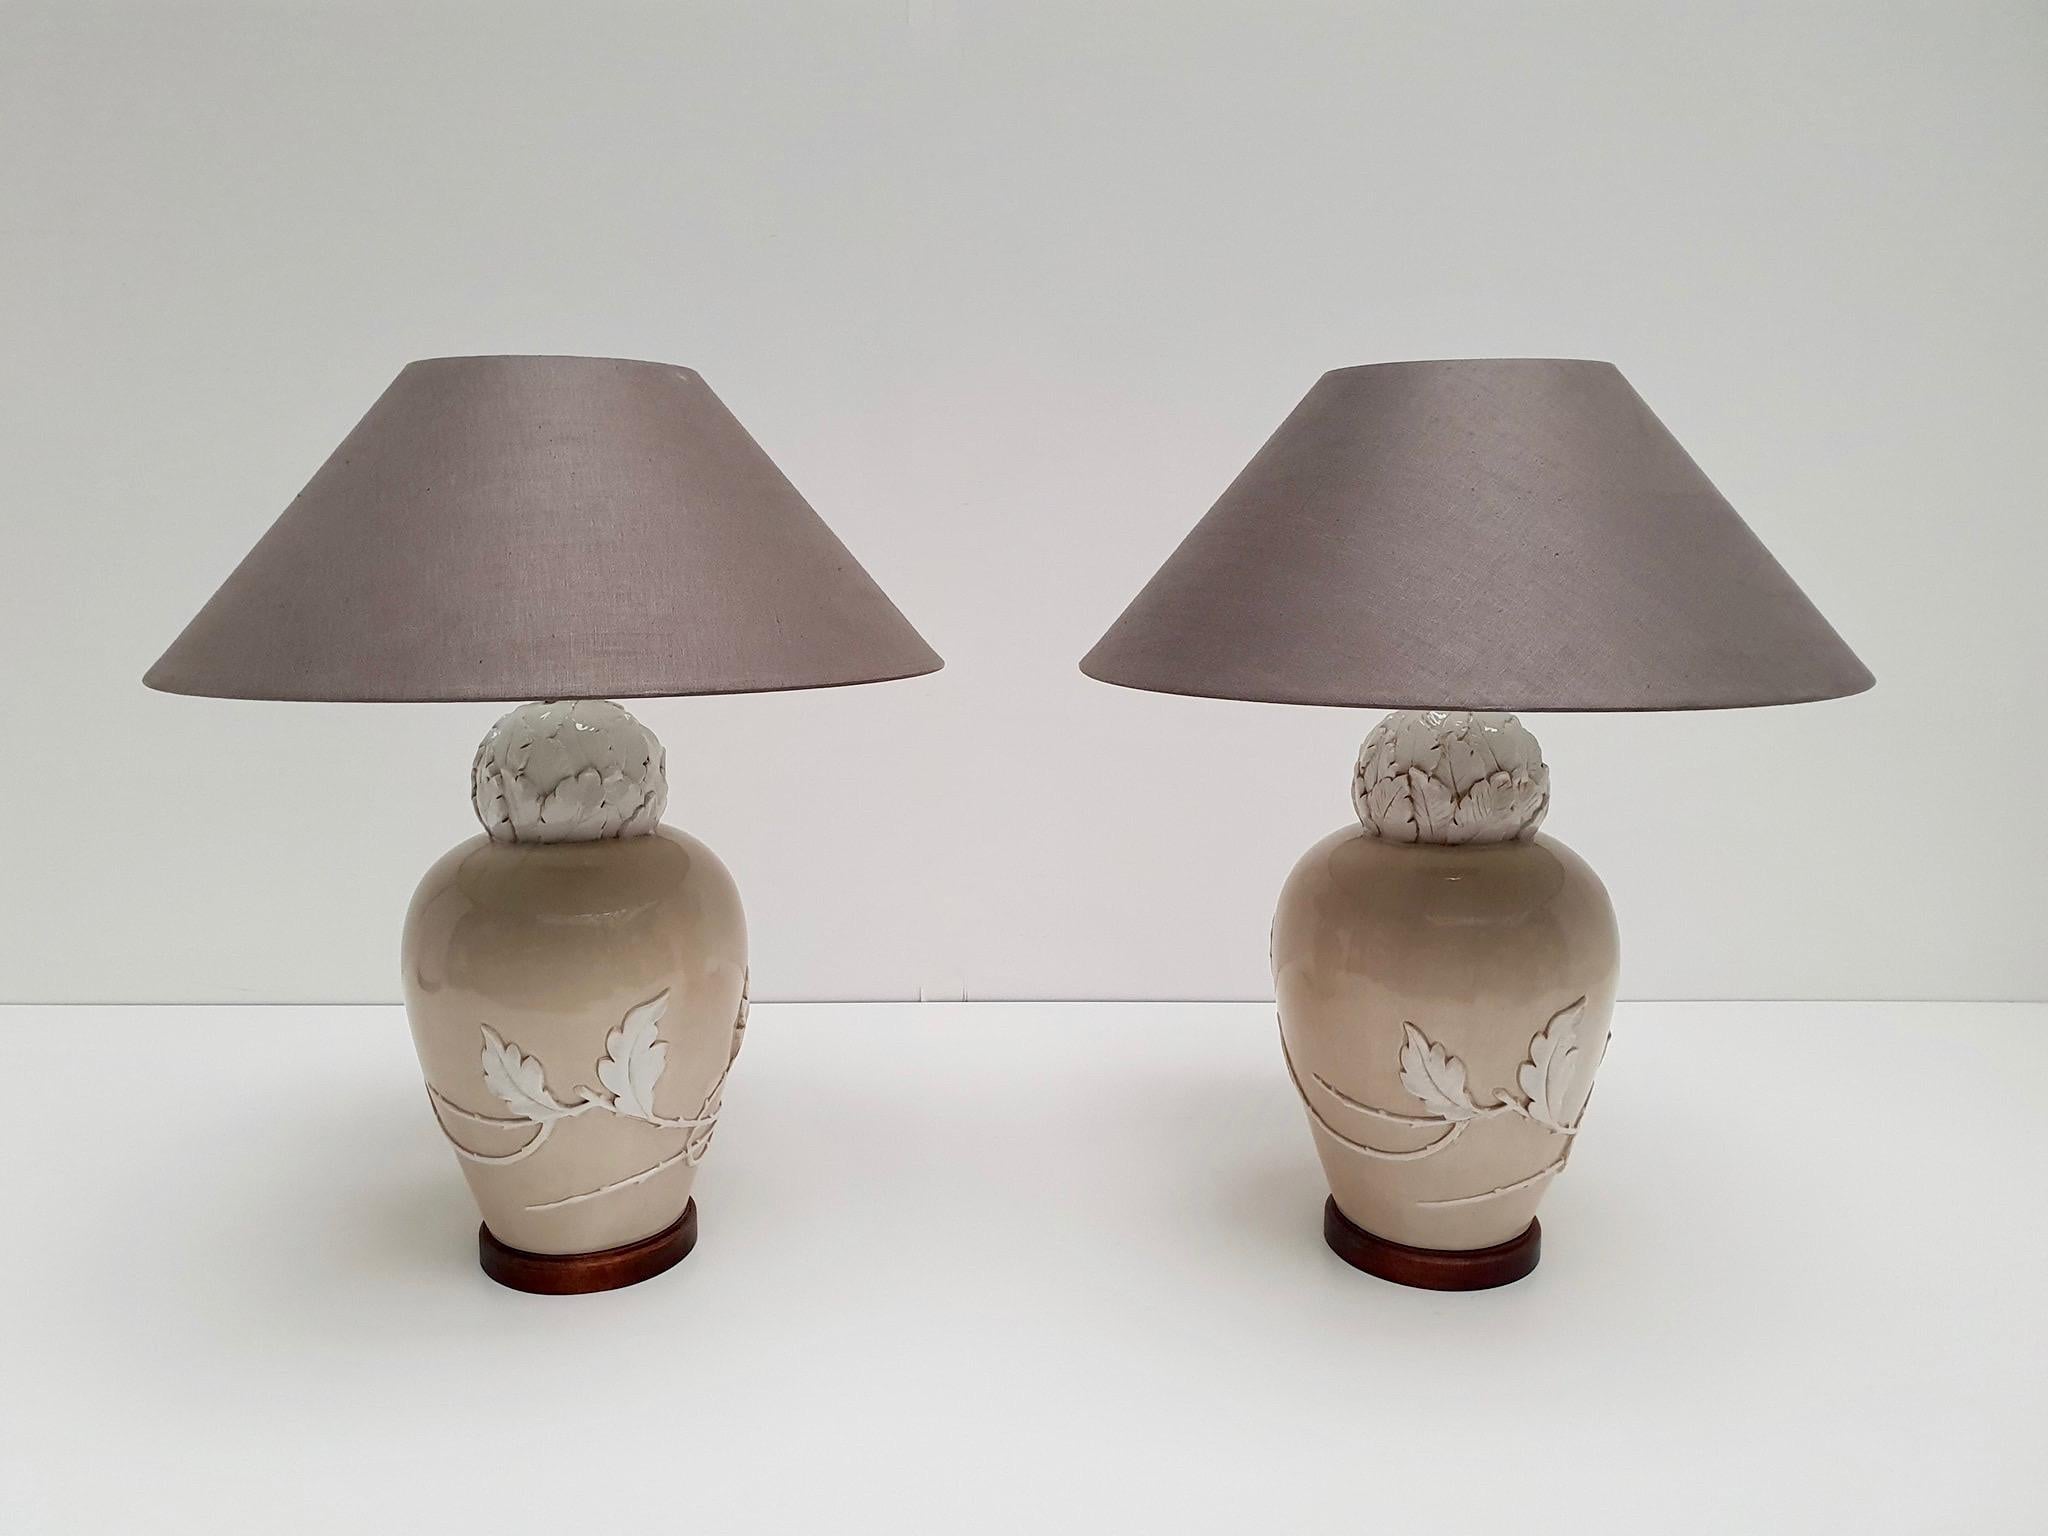 Italian Pair of Mid-20th Century Ceramic Table Lamps For Sale